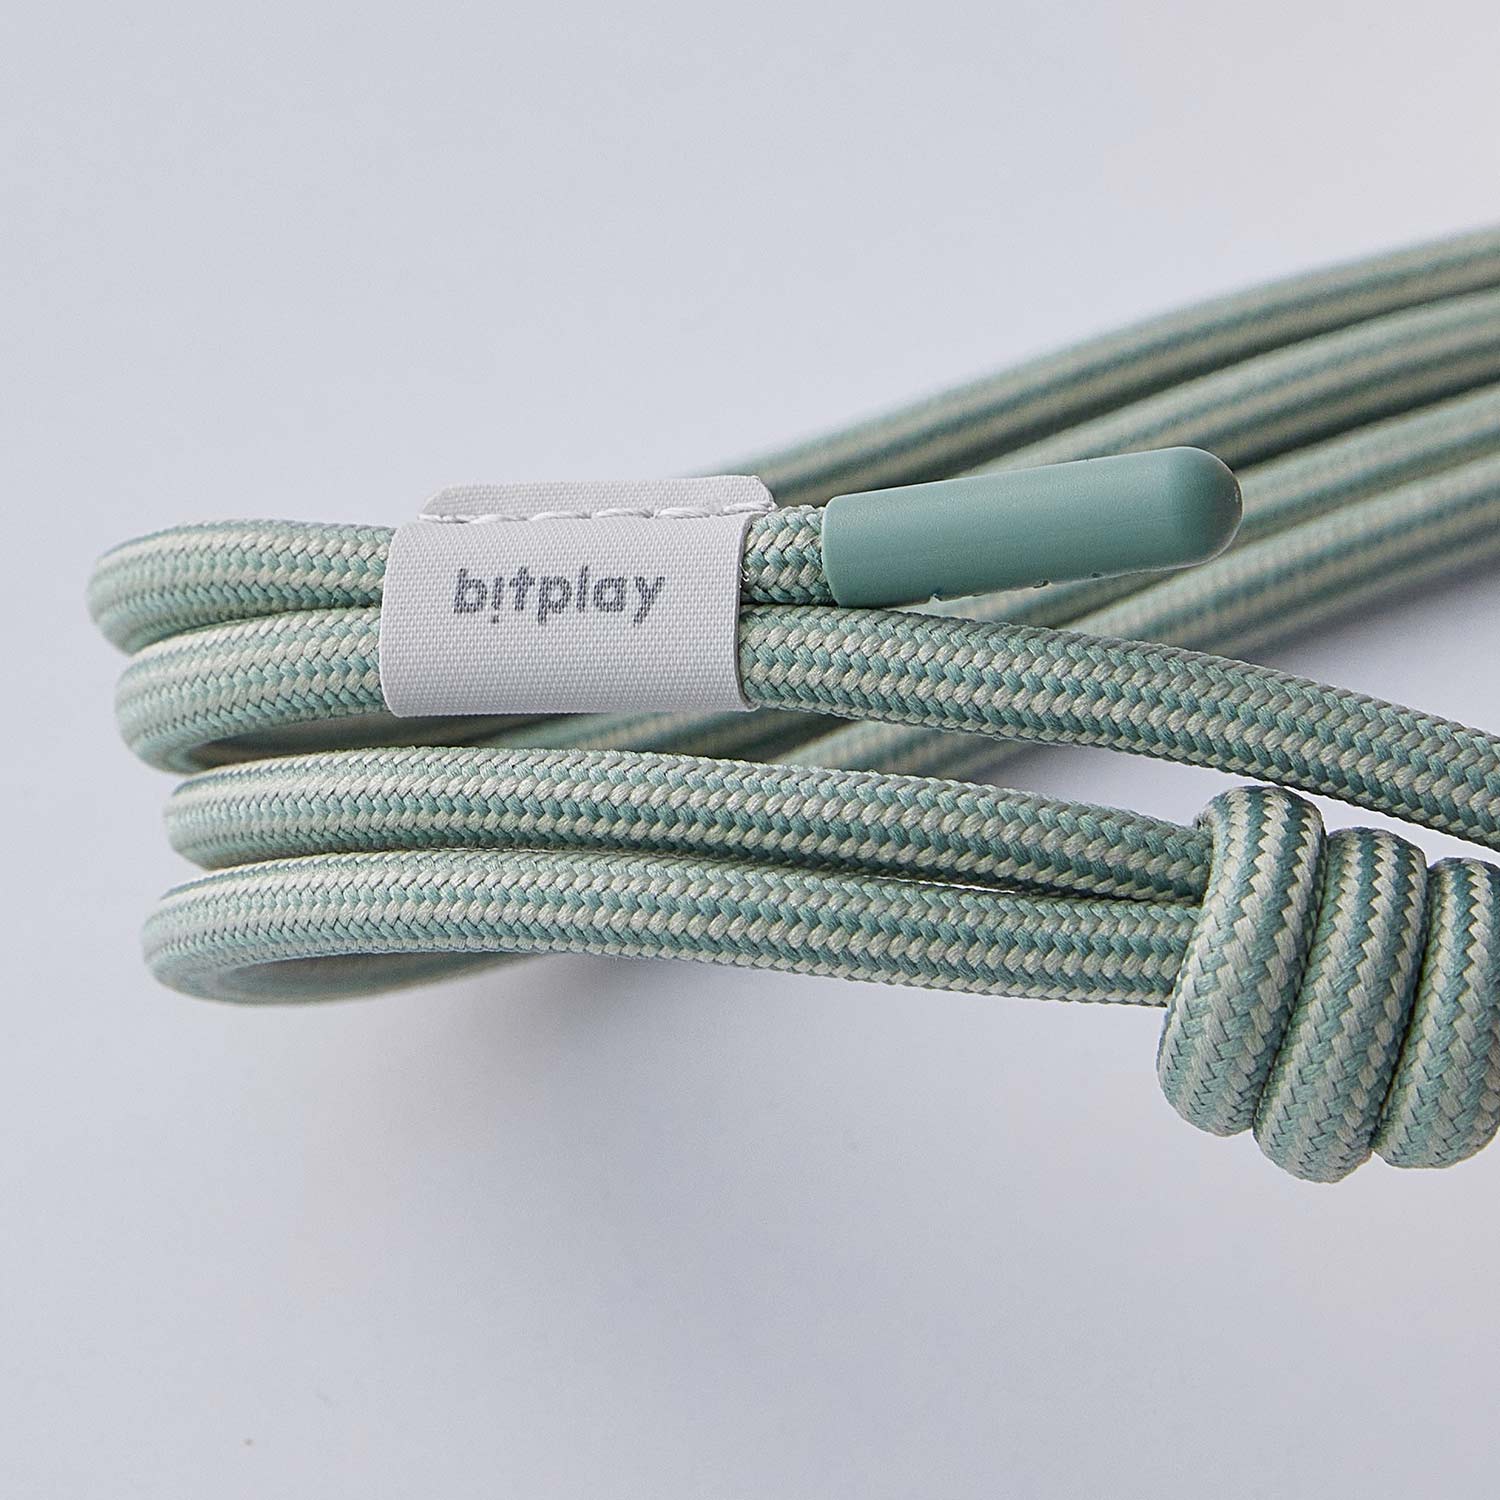 6mm Lite Strap - Sage Green  (Strap Adapter included）